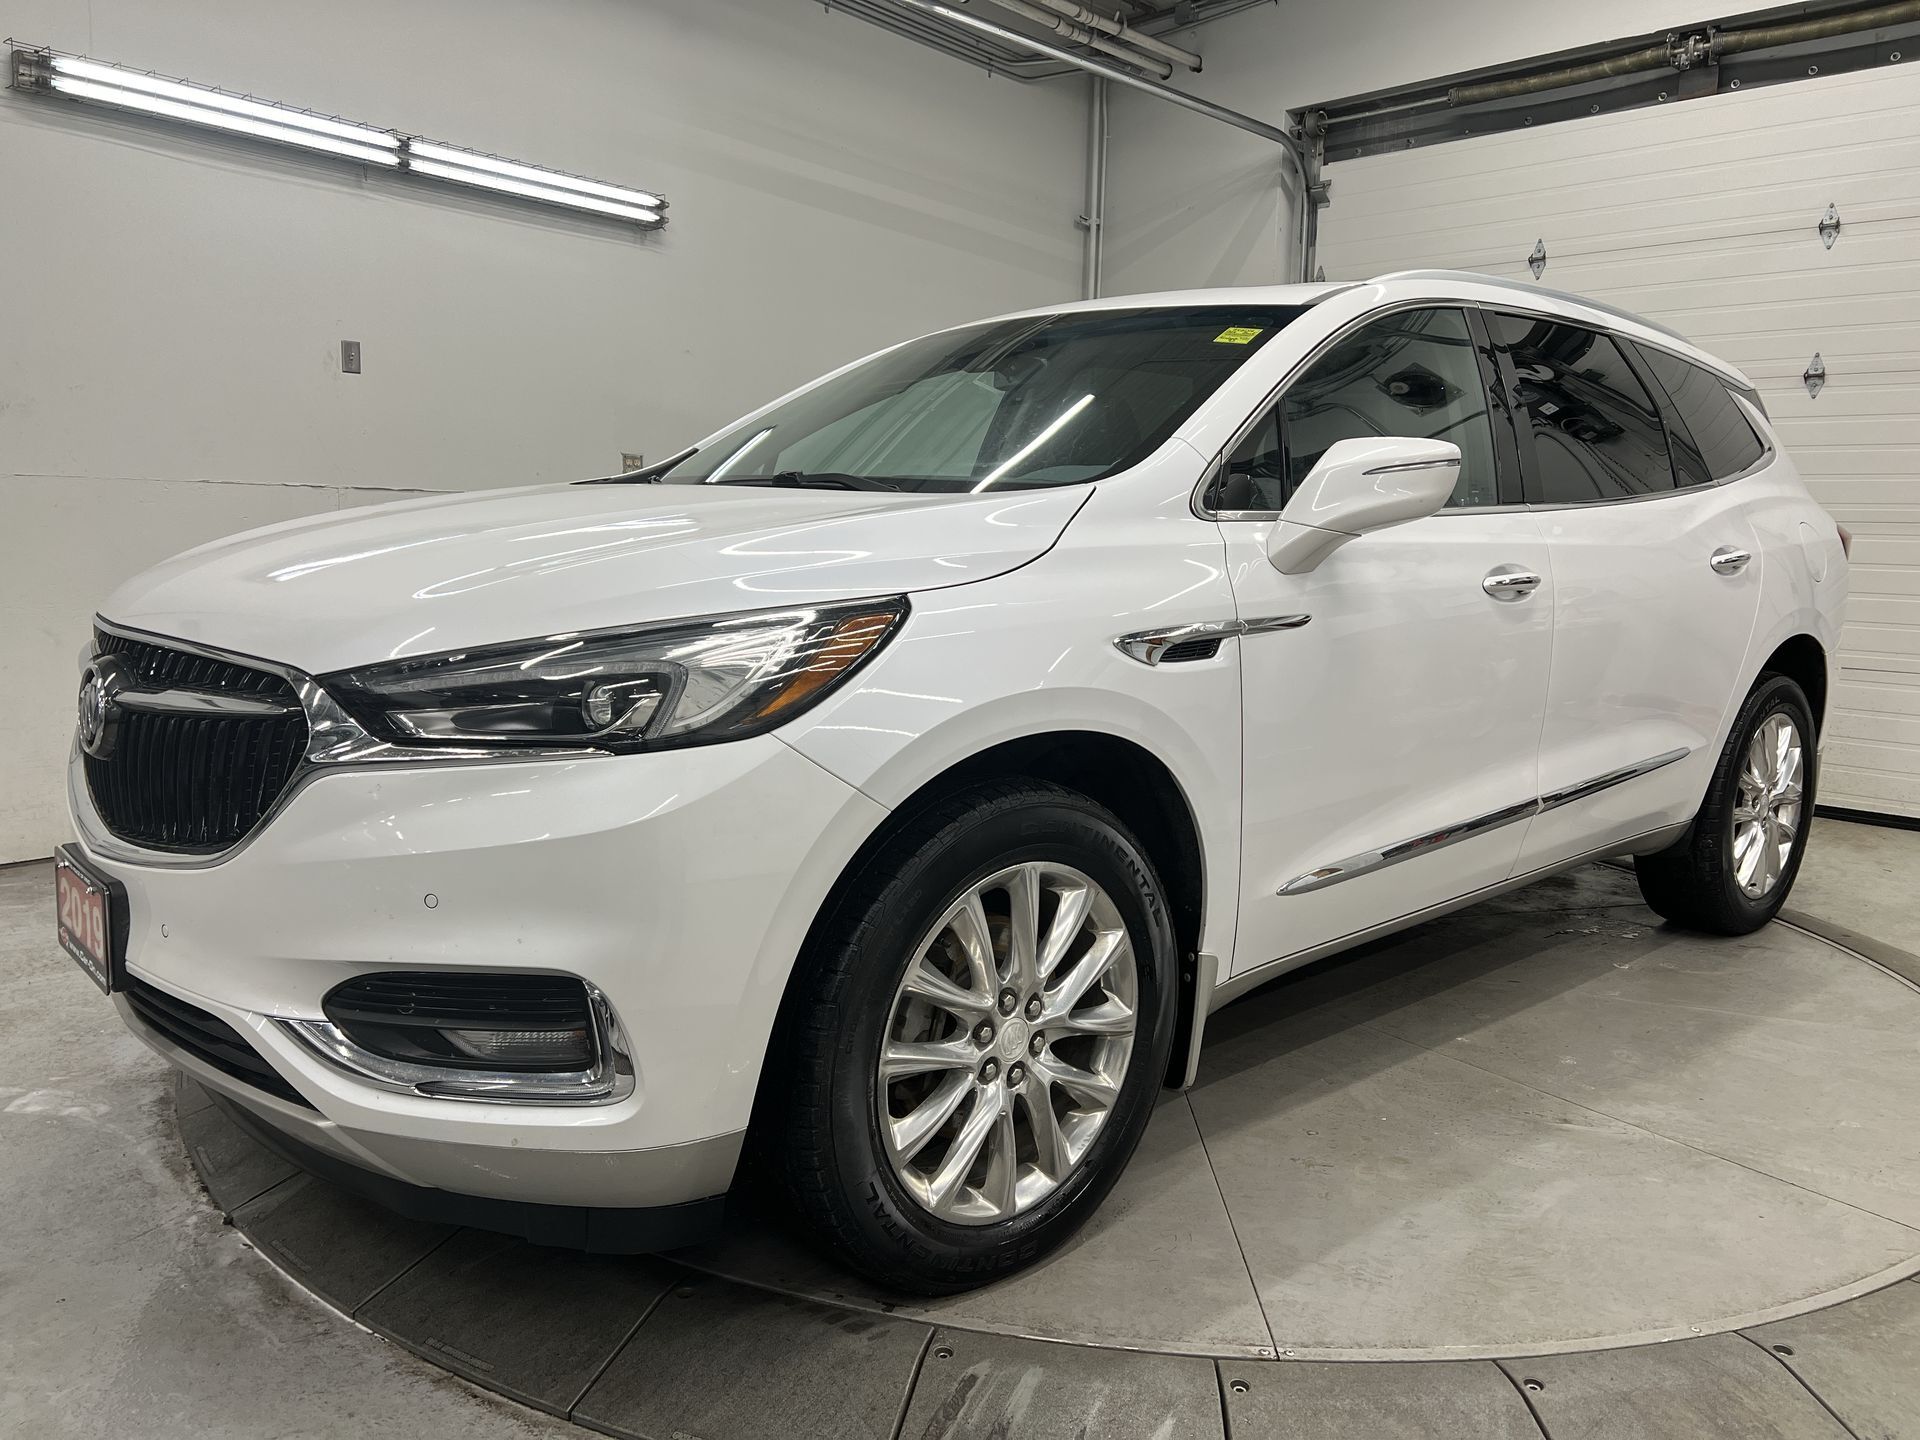 2019 Buick Enclave PREMIUM AWD| 7-PASS| PANOROOF| LEATHER| BLIND SPOT